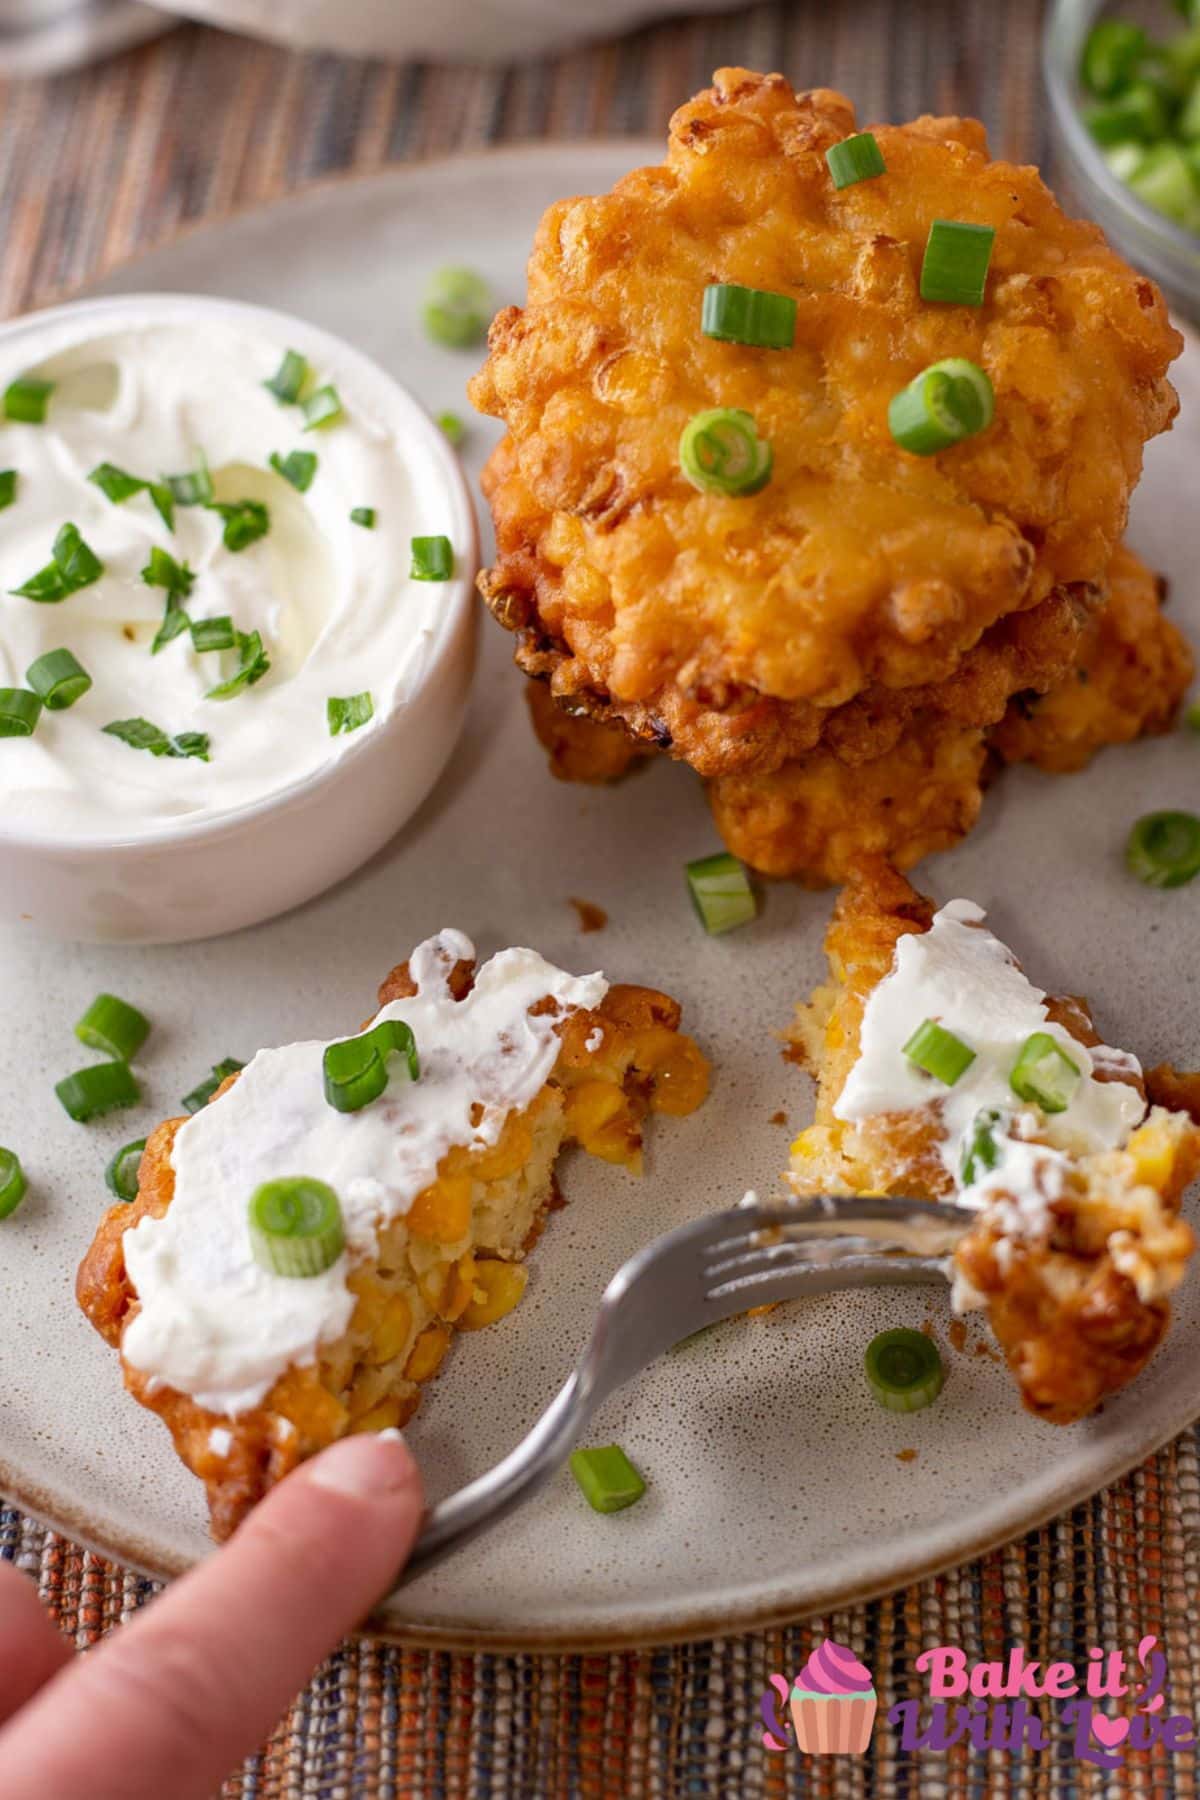 Tall image showing Southern corn fritters.